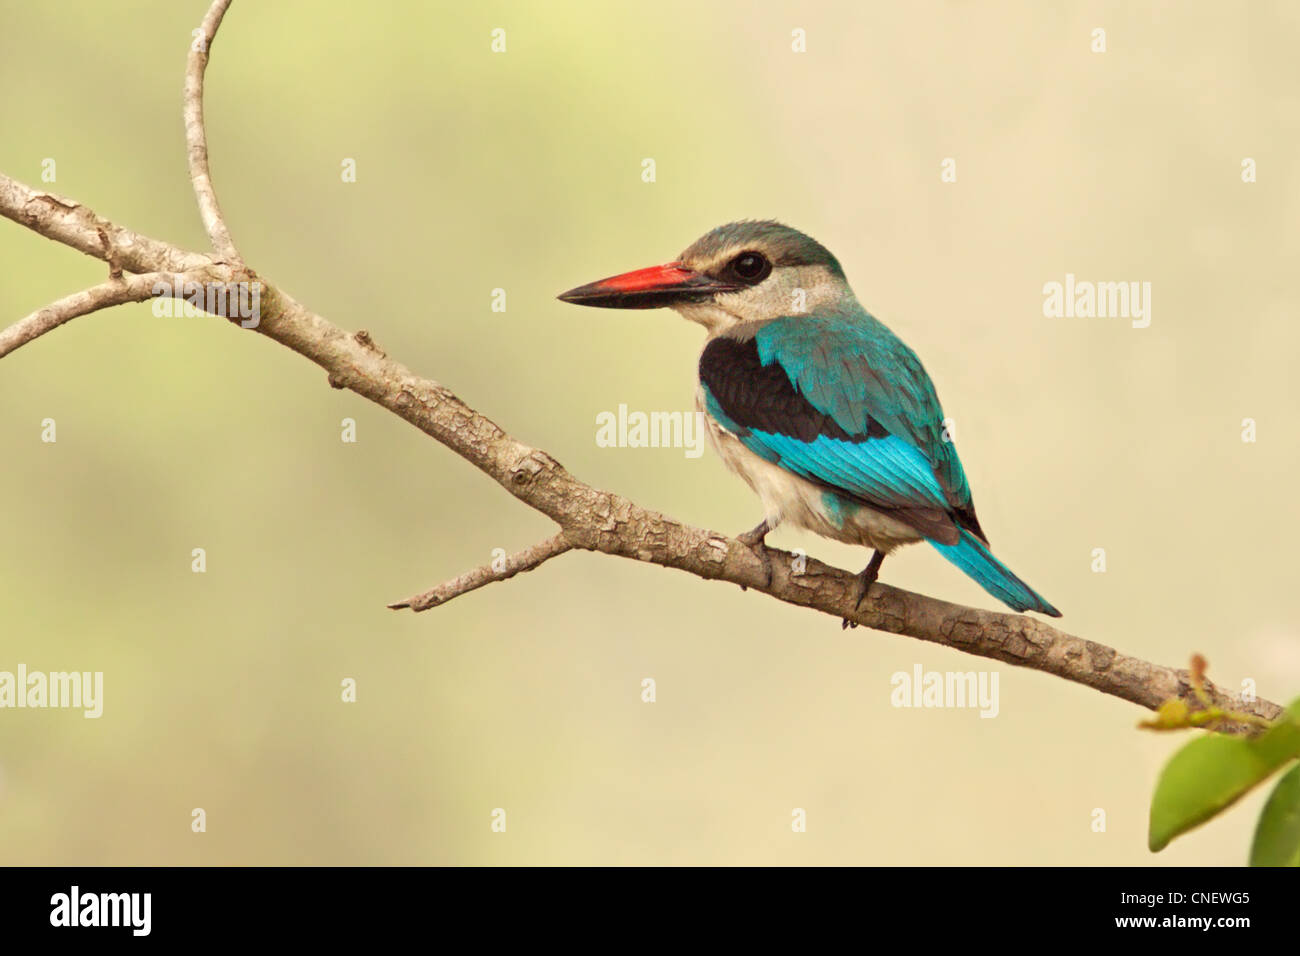 Woodland Kingfisher Banque D'Images